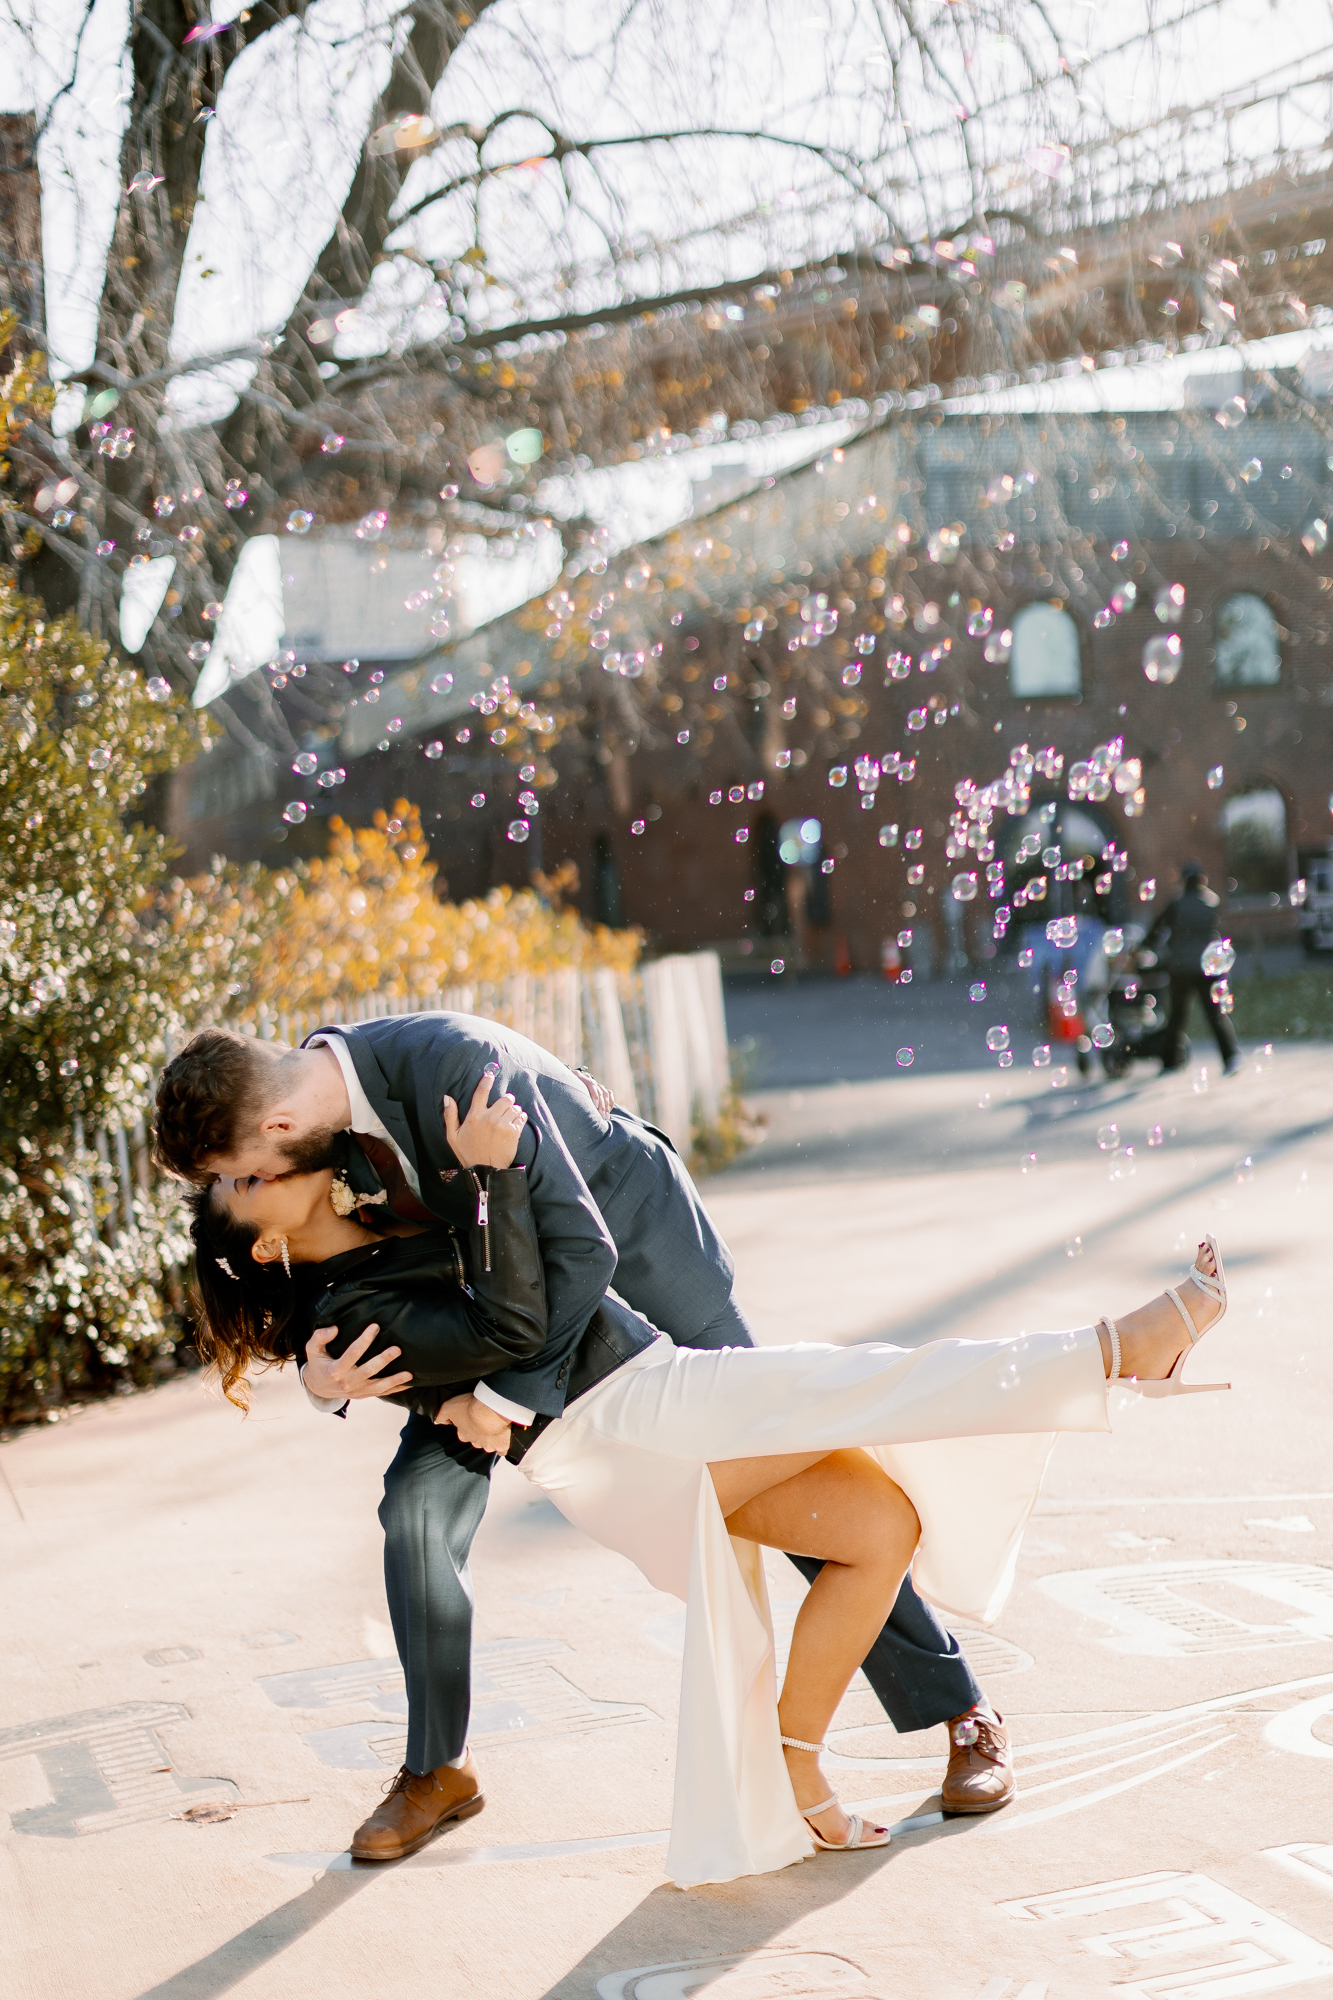 Candid Fall DUMBO Elopement with NYC views and foliage